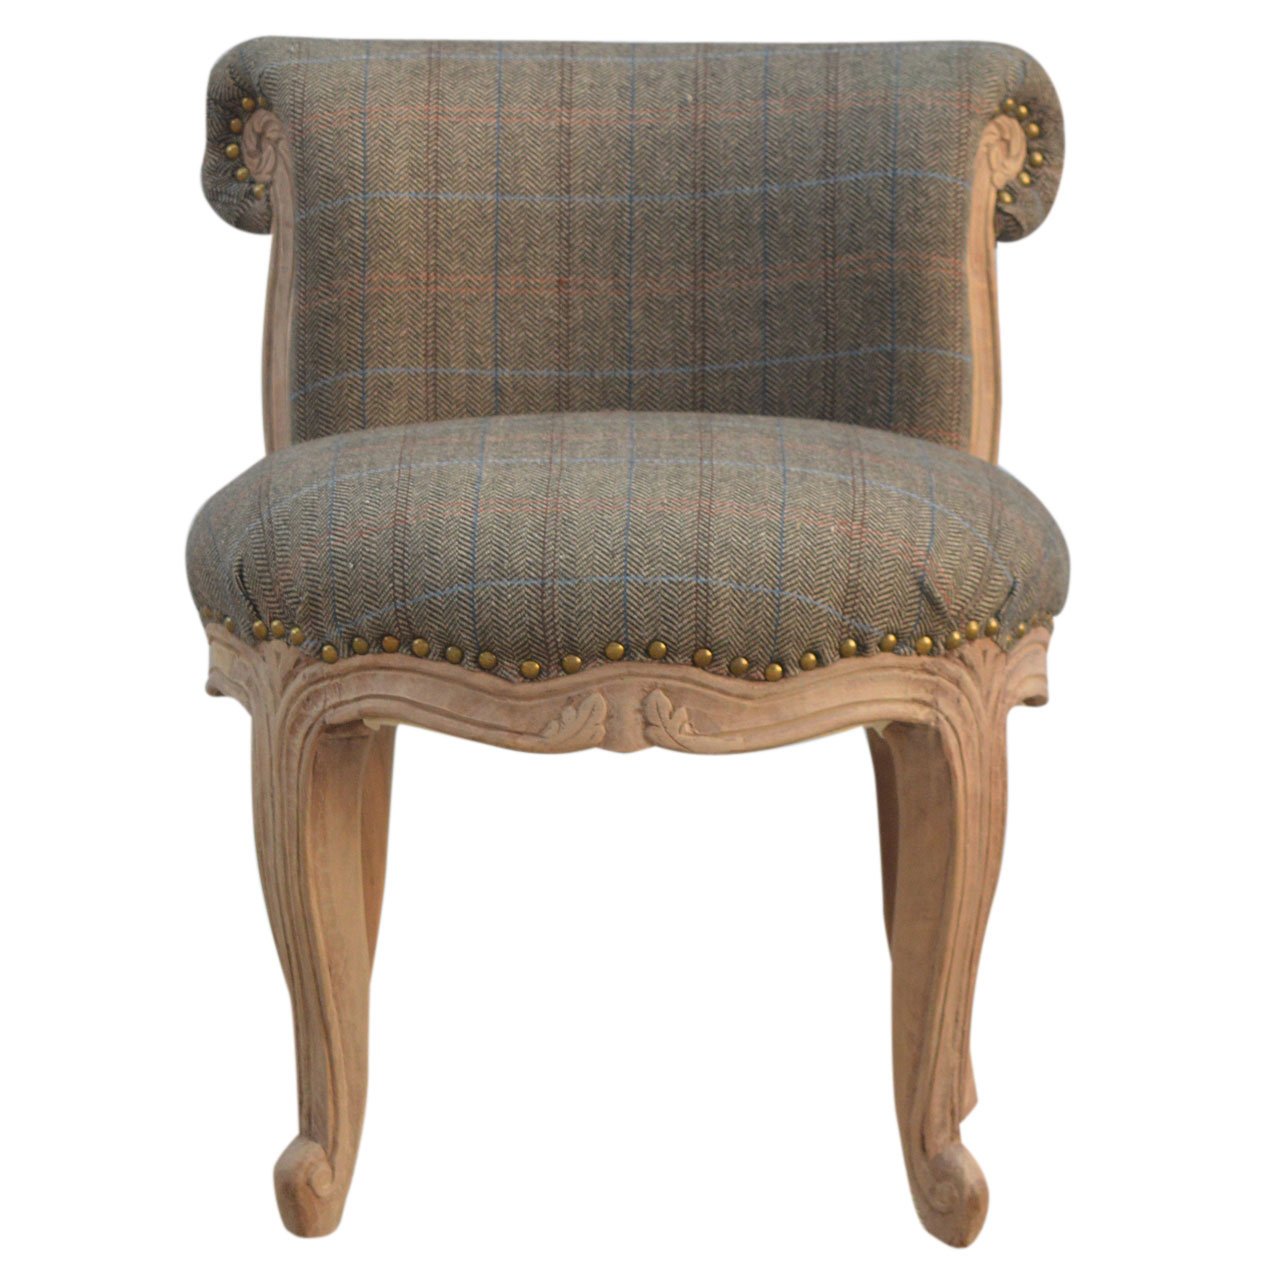 View Multi Tweed Studded Chair information